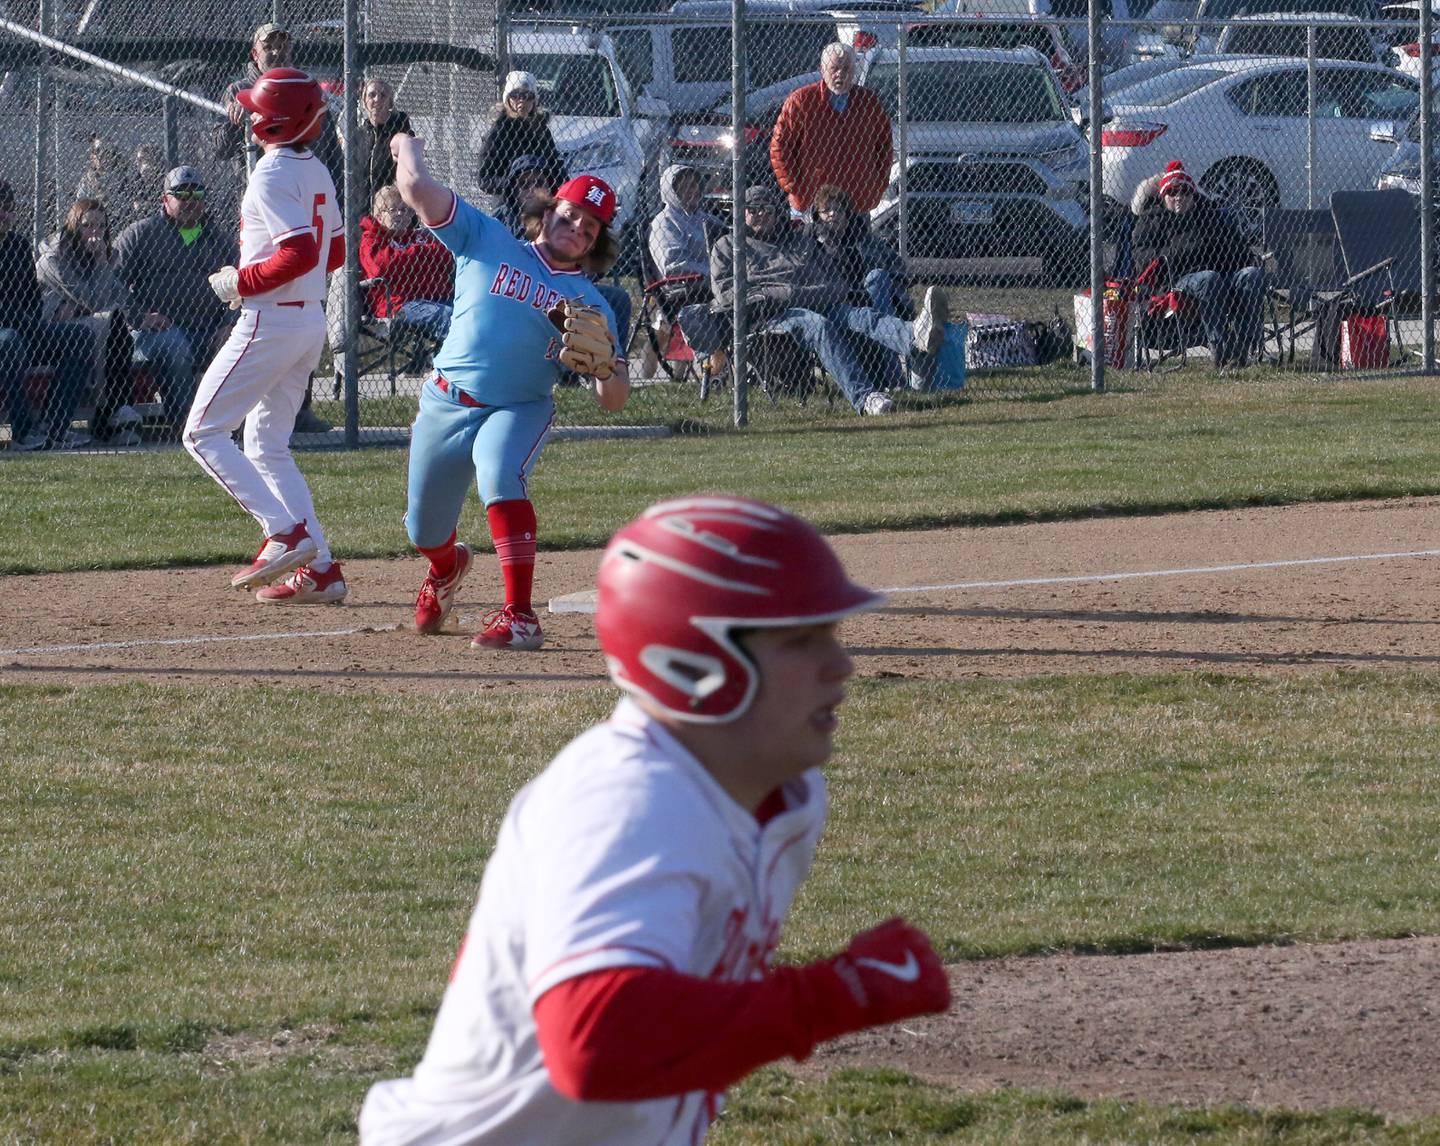 Hall's third baseman Joel Koch throws to first base after forcing out Ottawa's Aiden Mucci at third to get the double play while Ottawa's Branden Aguirre is out at first base on Tuesday, March 28, 2023 at Ottawa High School.